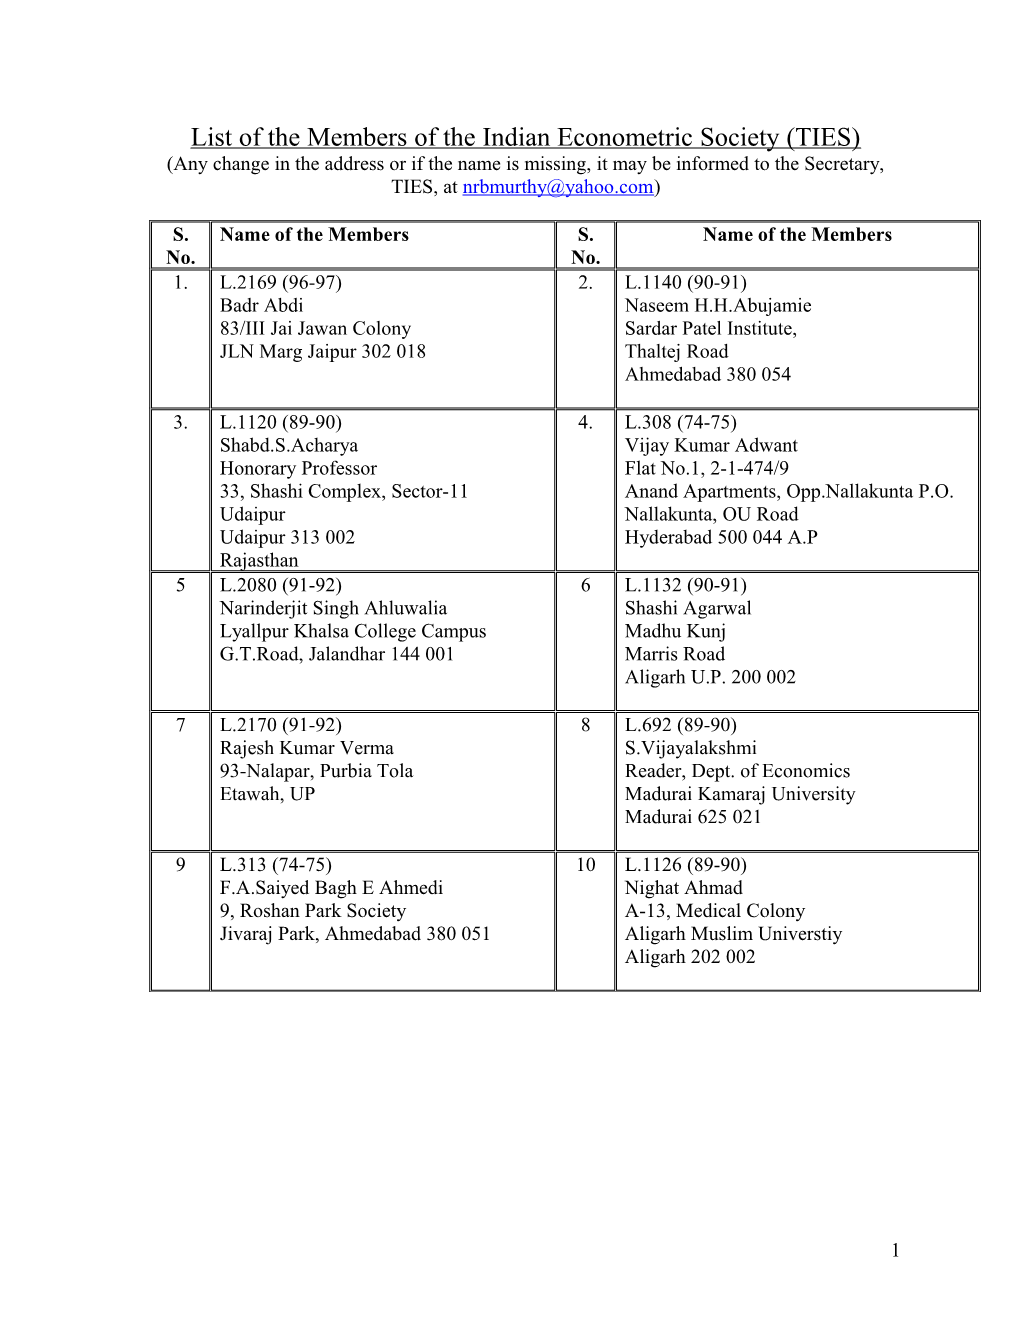 List of the Members of the Indian Econometric Society (TIES)